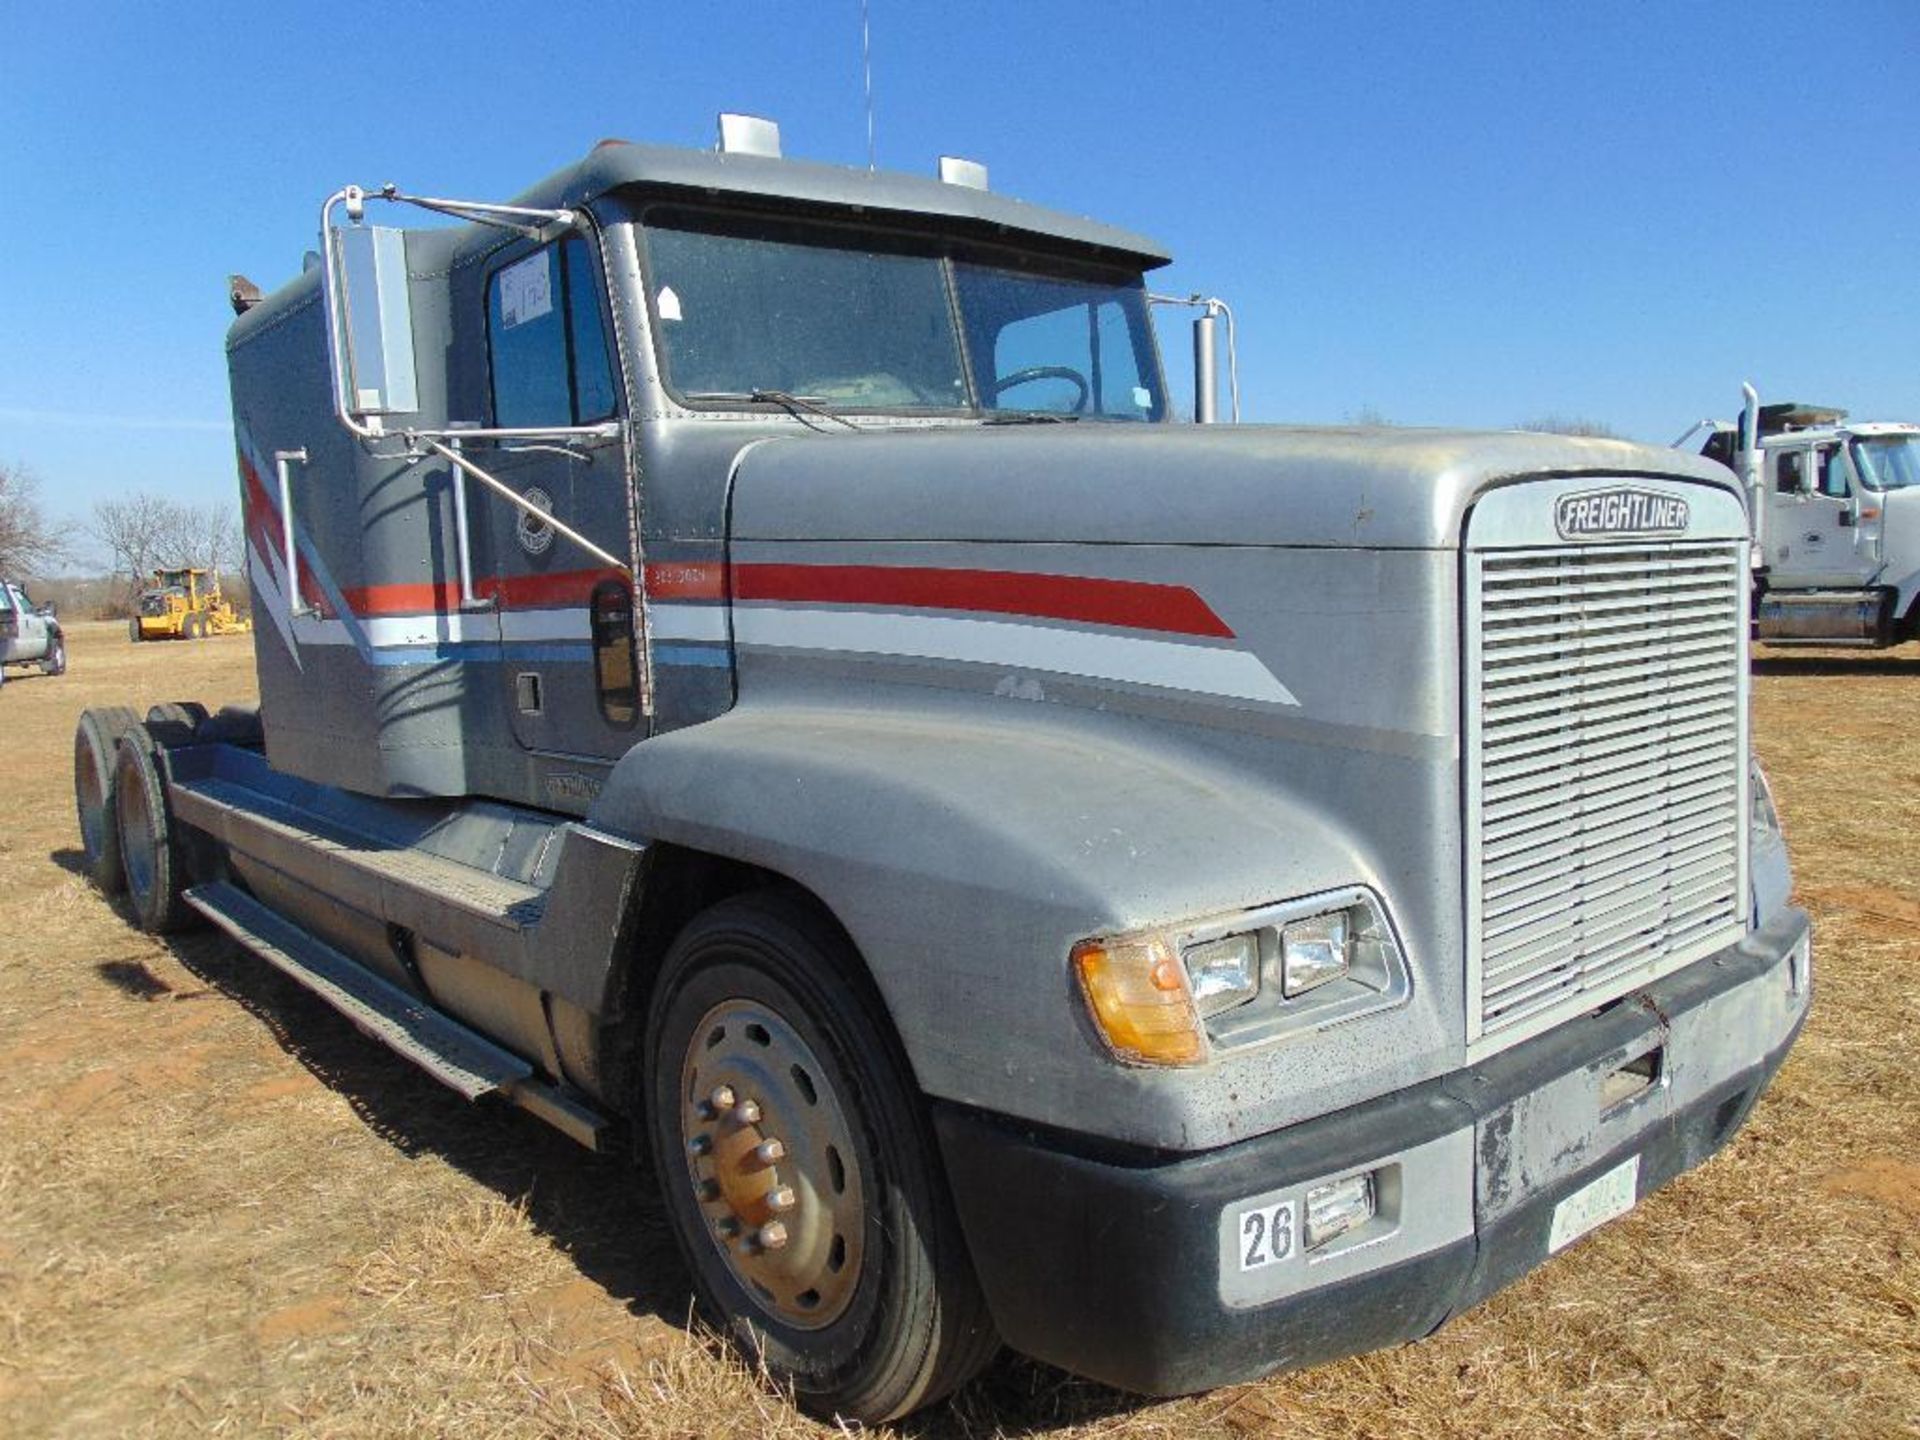 1993 Freightliner T/A Truck Tractor, s/n 1fuydxyb7pp421164, cat 3406 eng, 9 spd trans, od reads